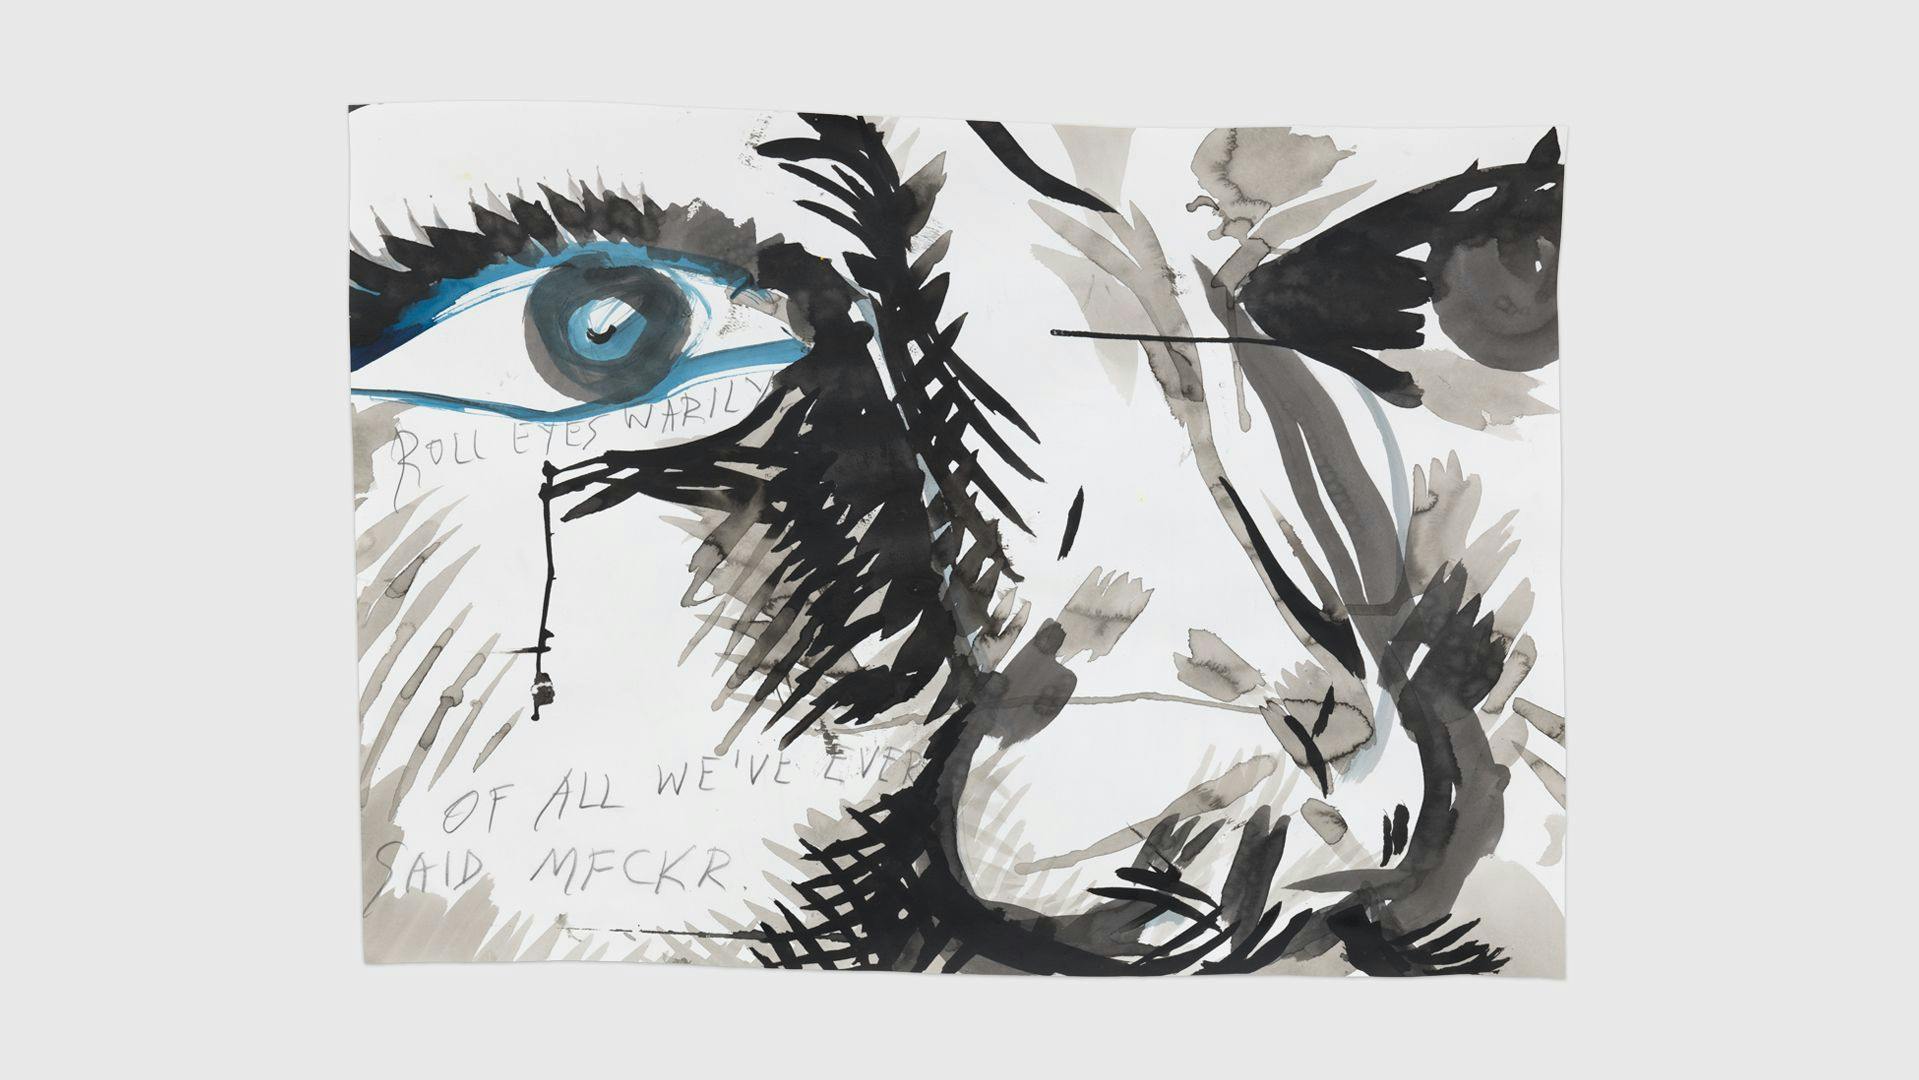 An ink, colored pencil, and graphite drawing on paper by Raymond Pettibon, titled No Title (Roll eyes warily...), dated 2019.